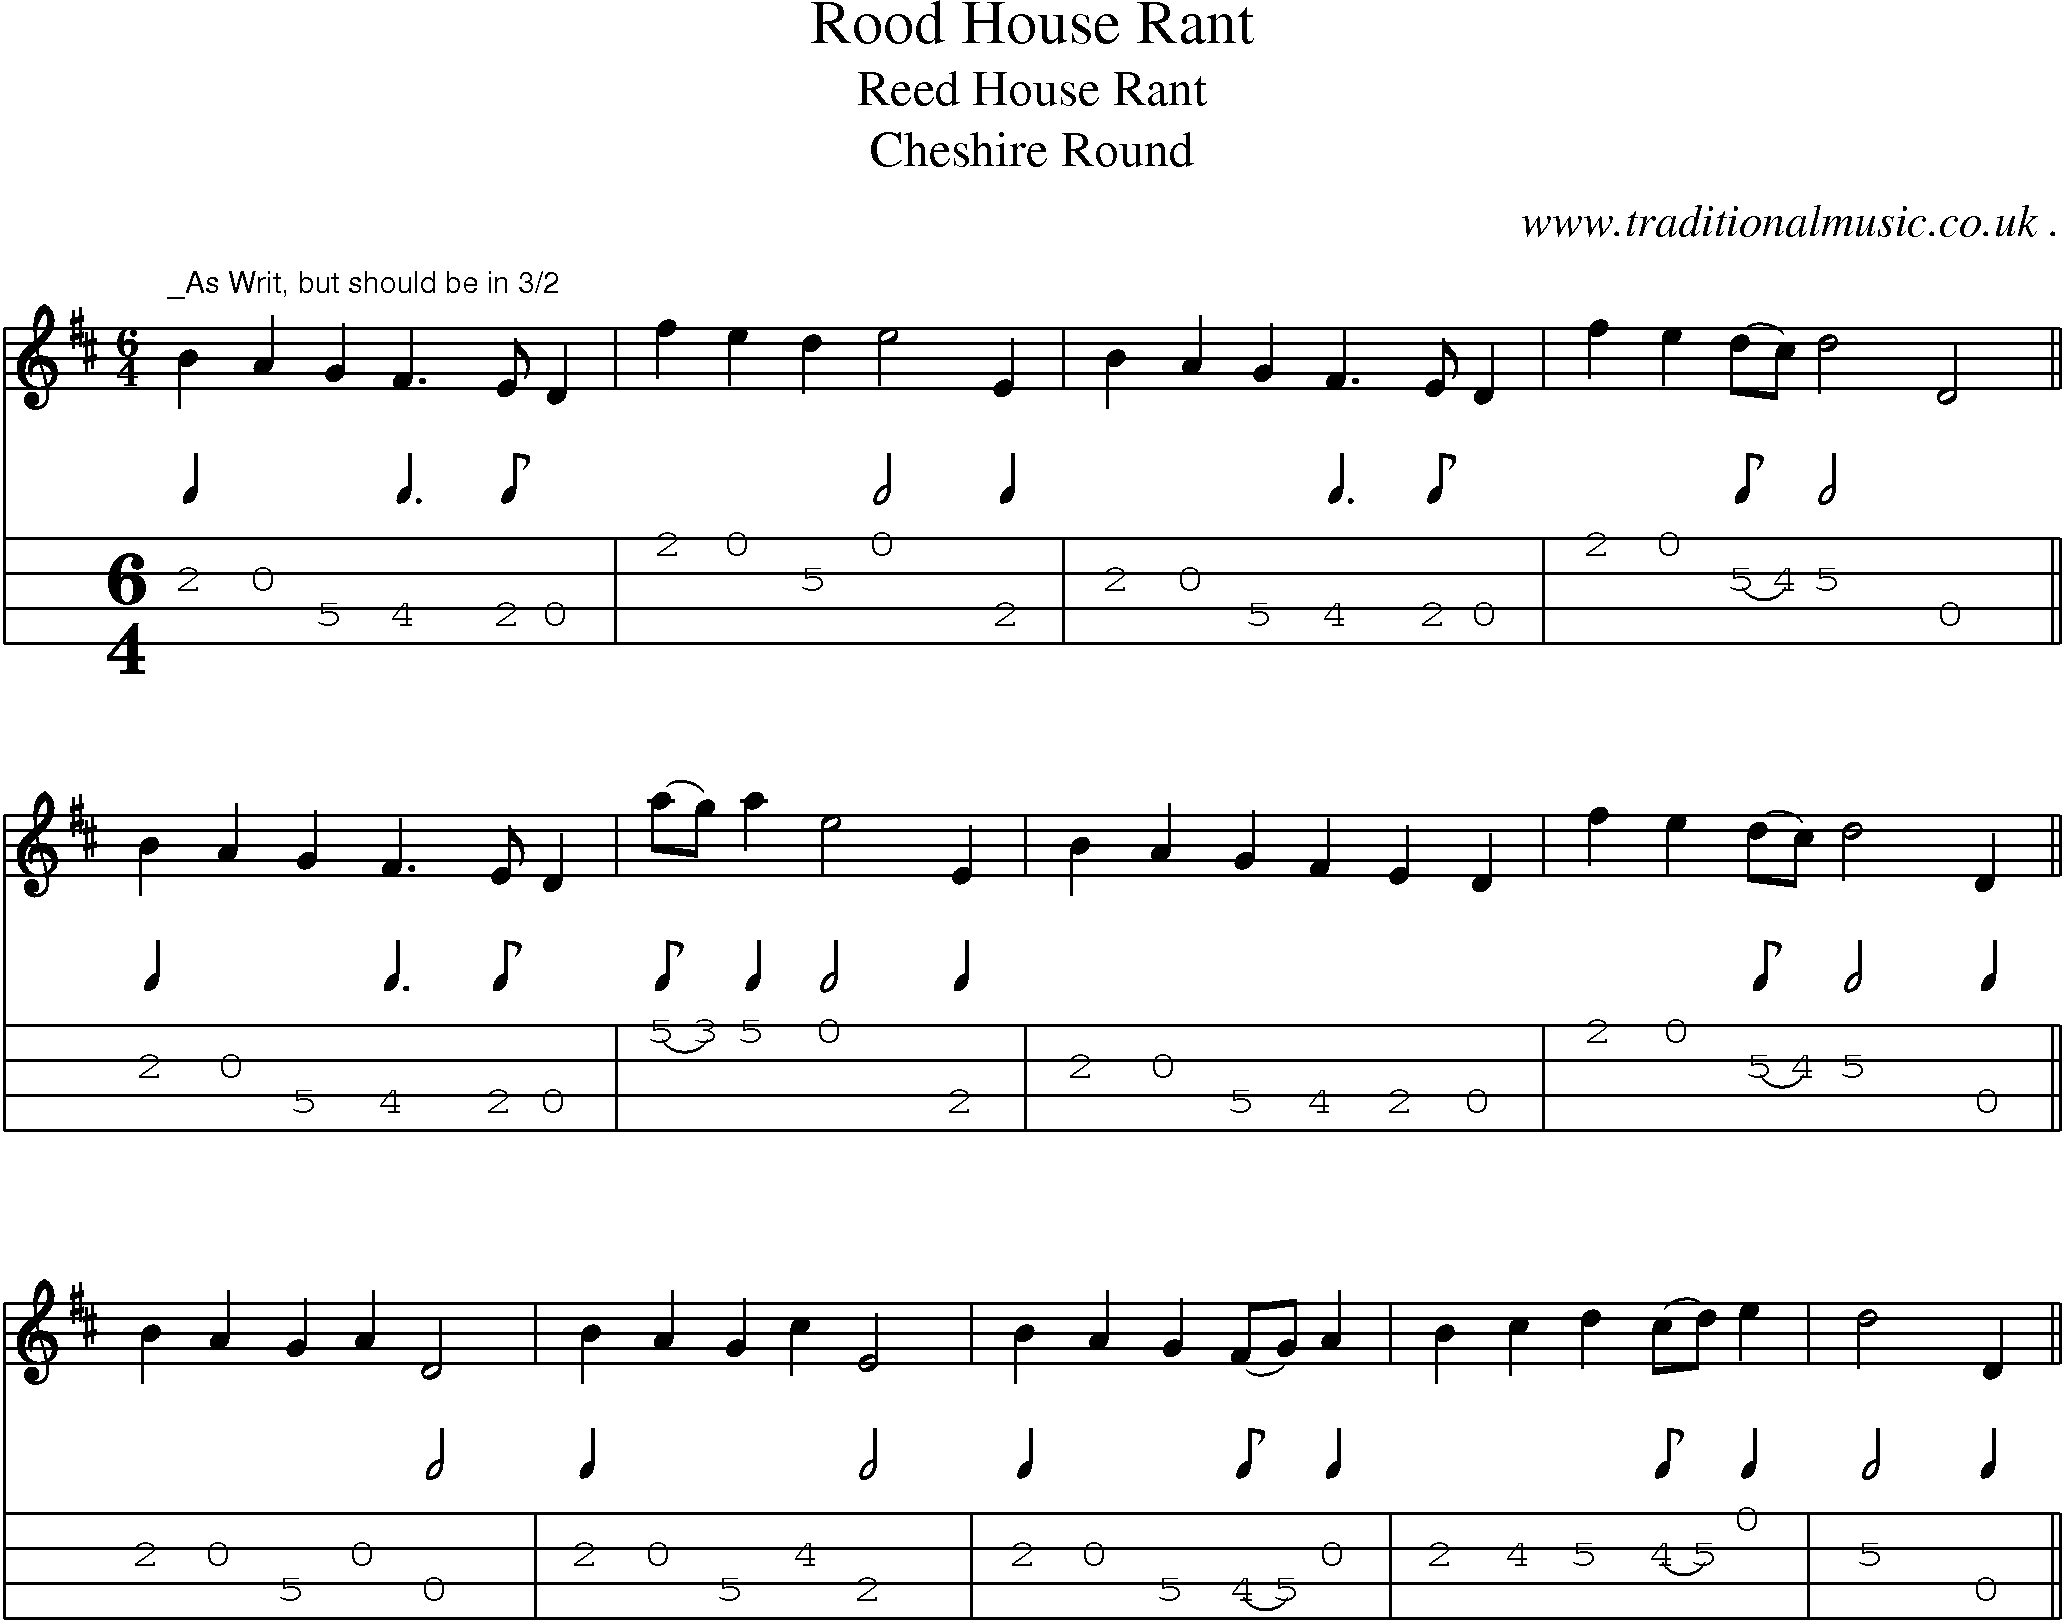 Sheet-Music and Mandolin Tabs for Rood House Rant